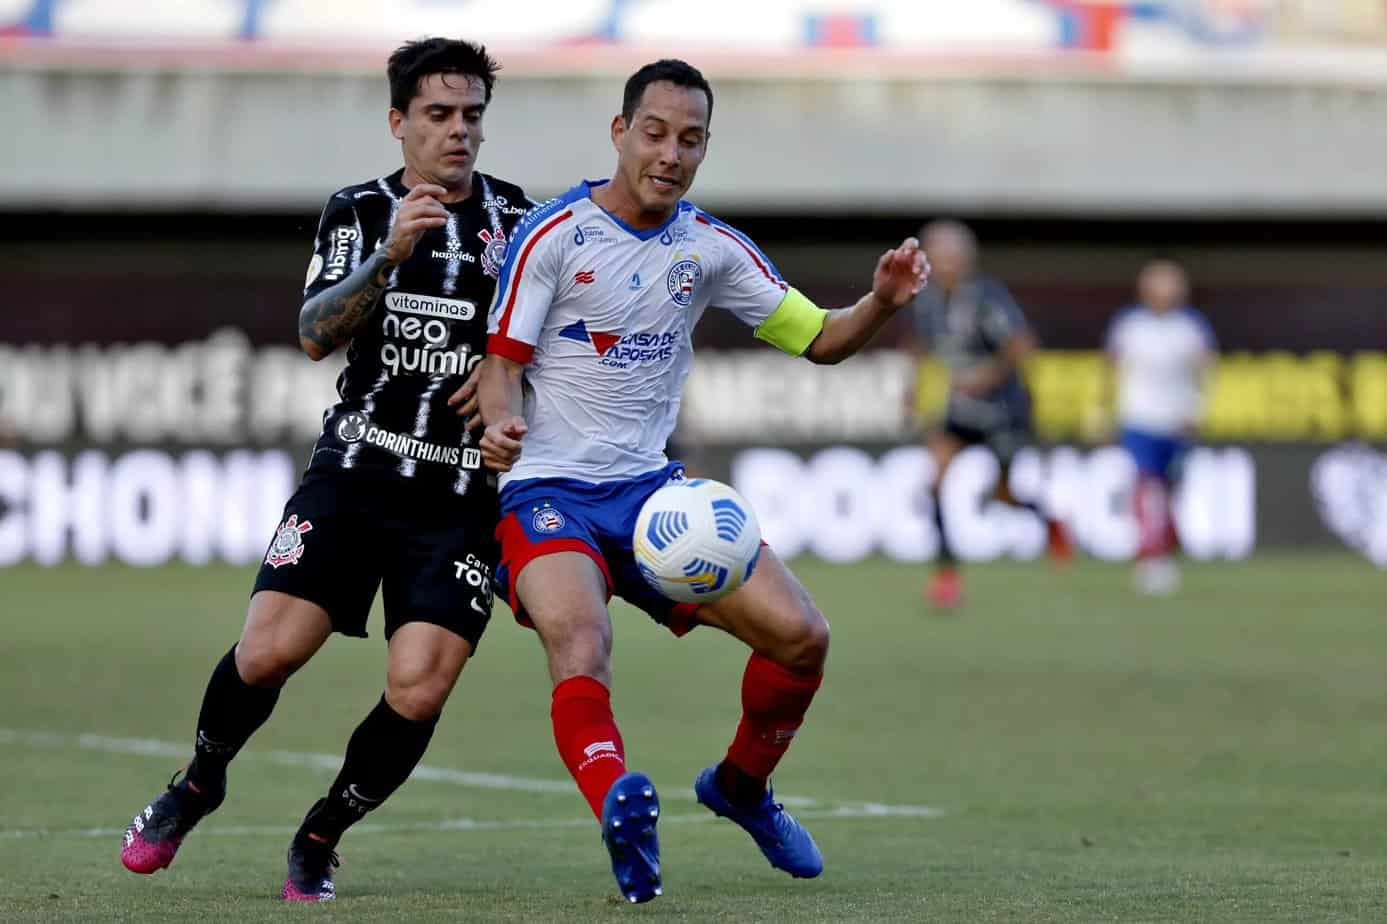 Bahia vs. Corinthians Preview and Betting Odds